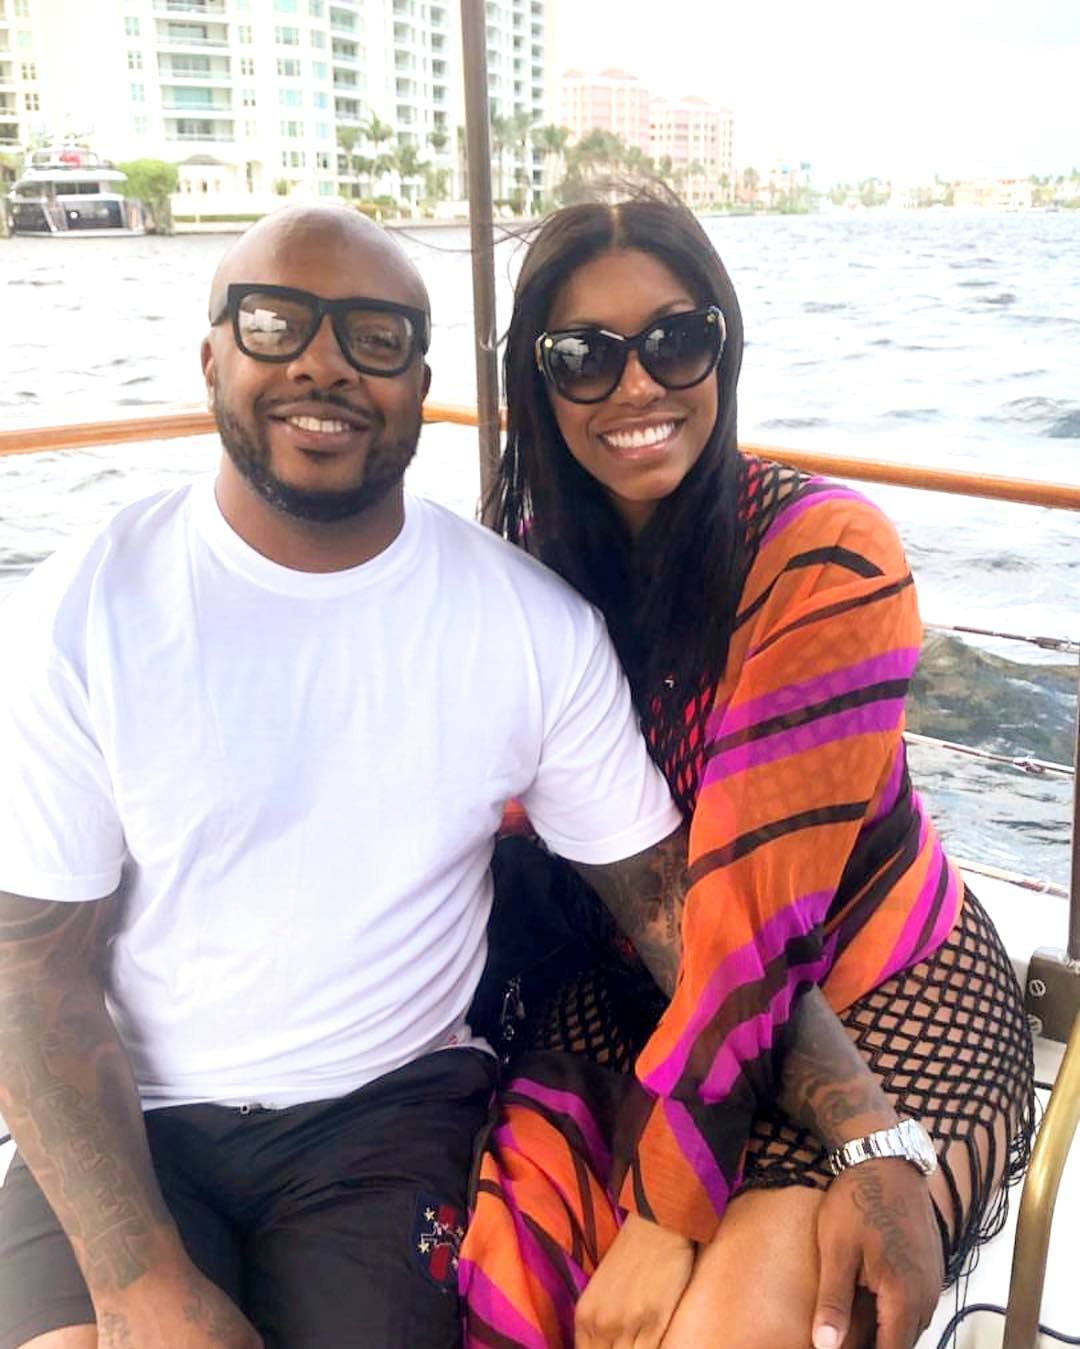 Porsha Williams Shares The Most Emotional Moment Of Her Life: Dennis McKinley's Marriage Proposal - Watch The Videos & Photos